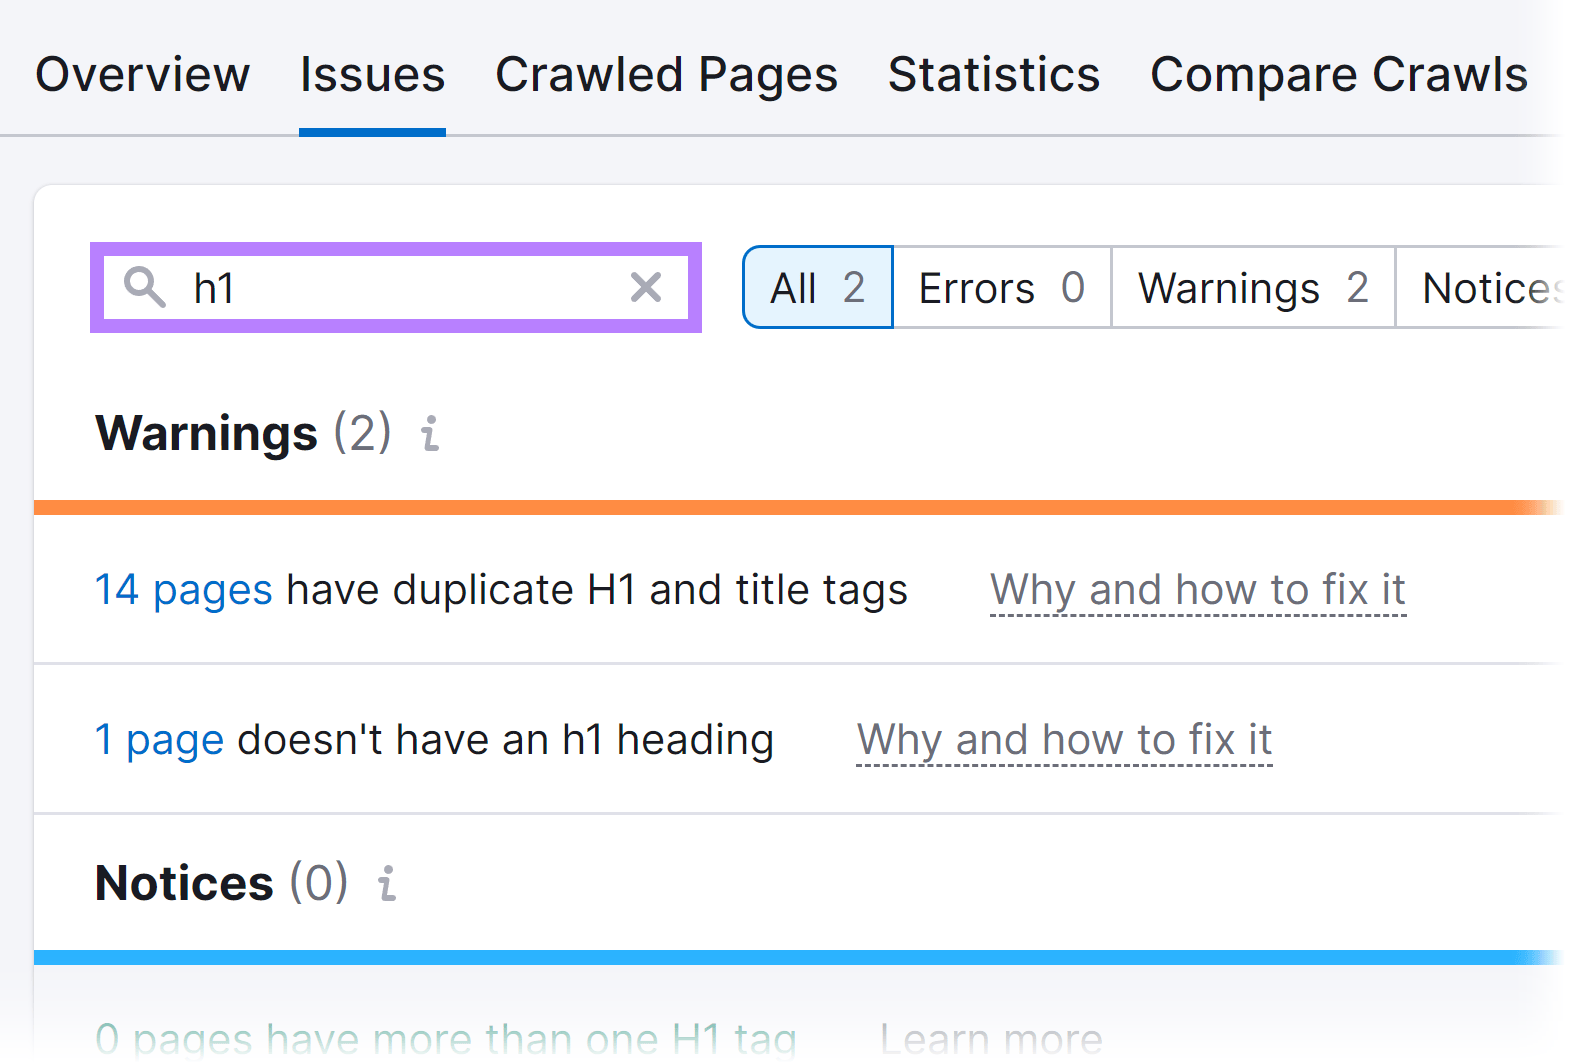 Issues page with 'h1' entered in the search box.